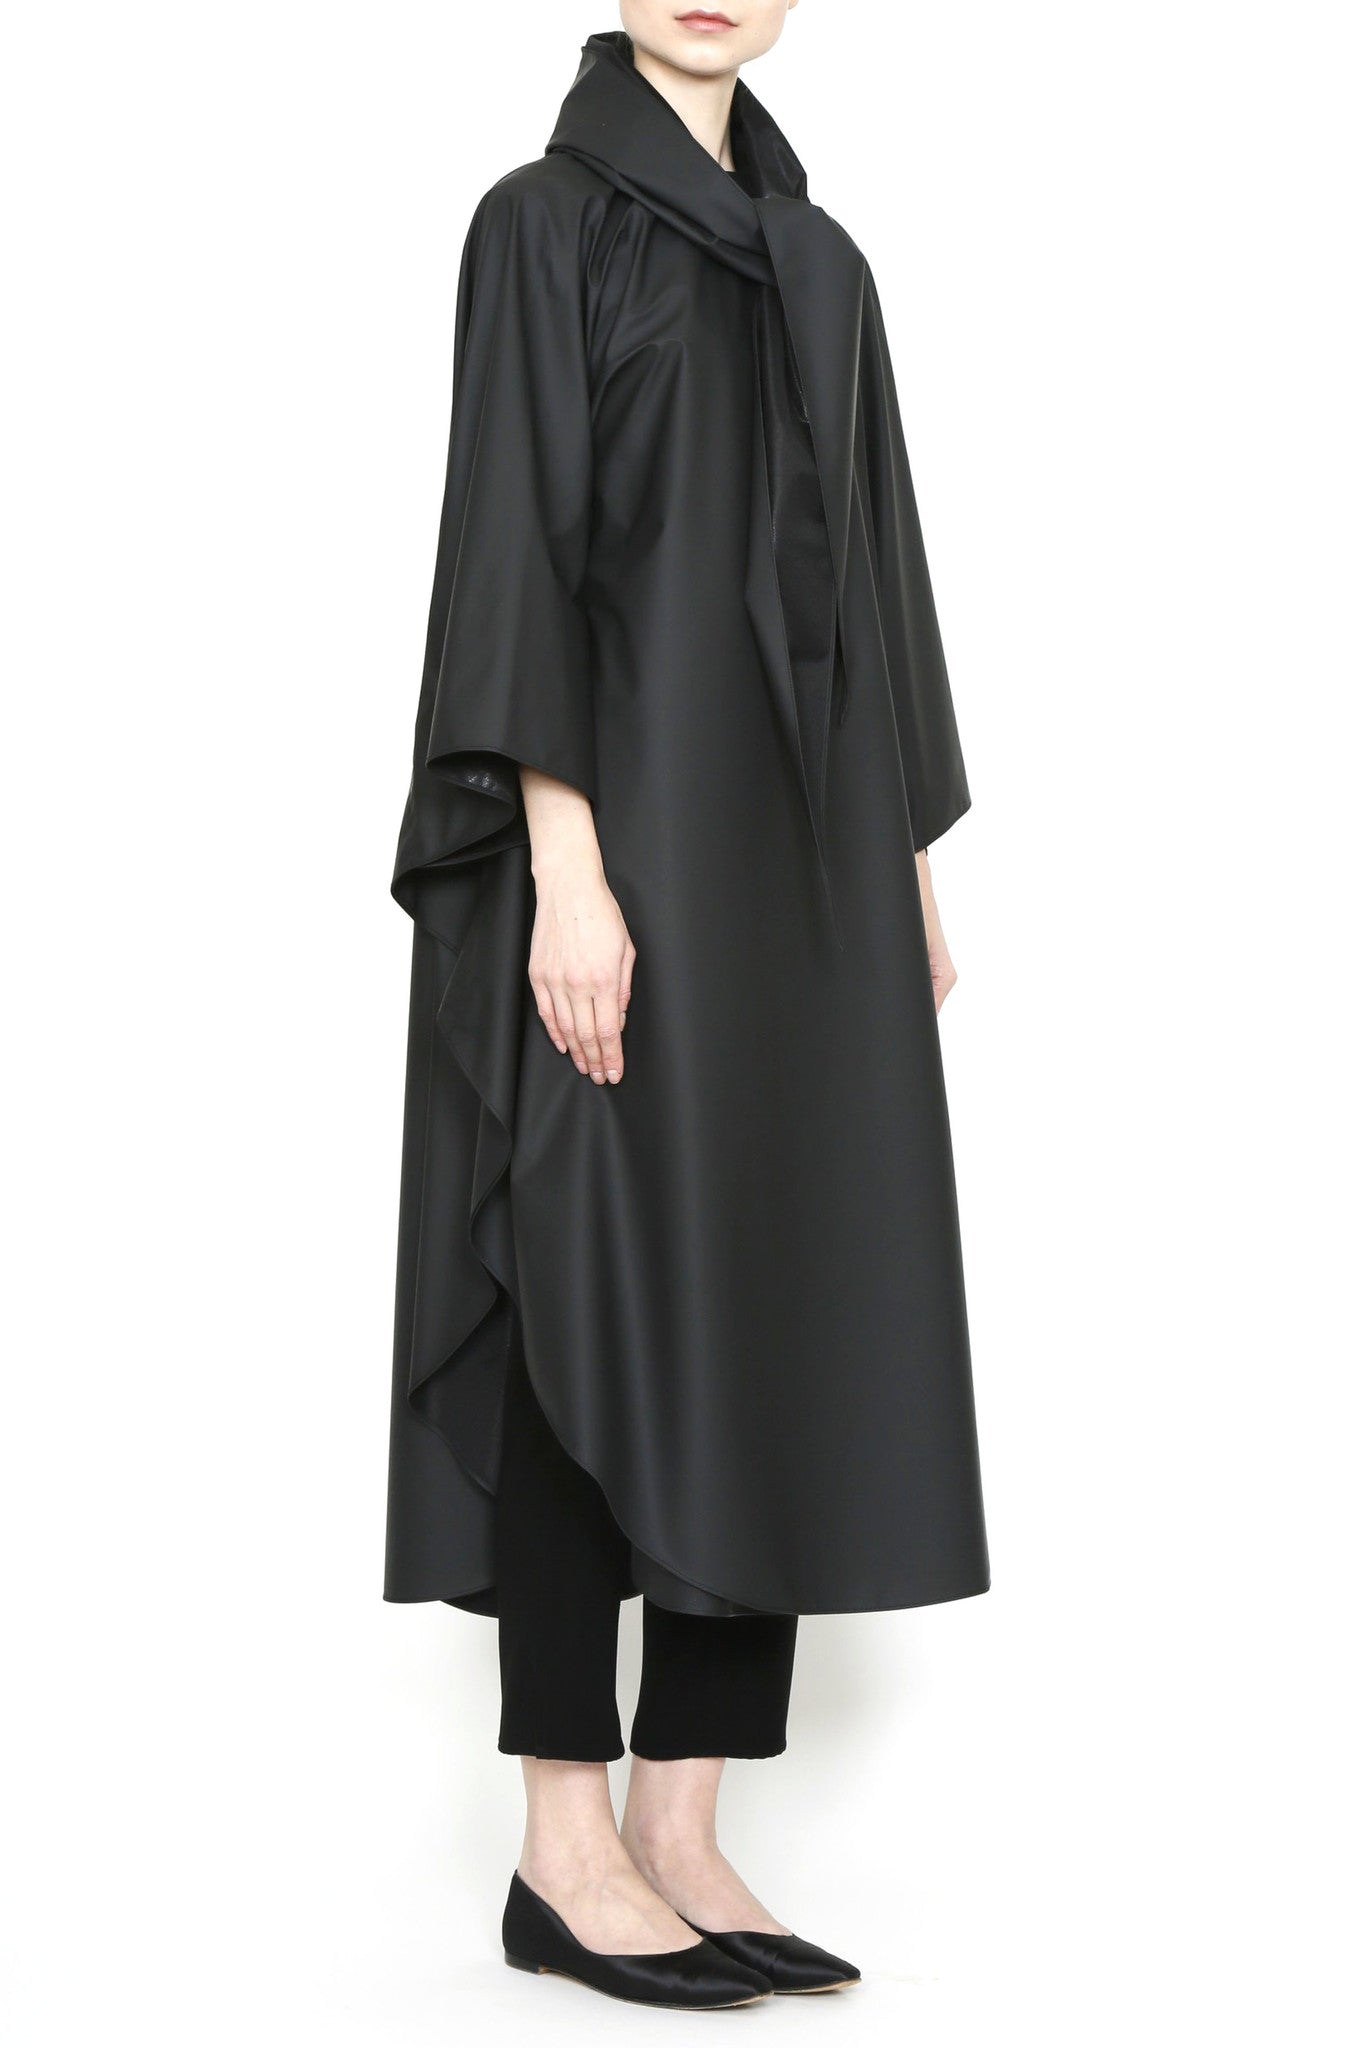 Zero Waste Sustainable One-Size-Fits-All Rain Cape in Water-Repellent Fabric-3